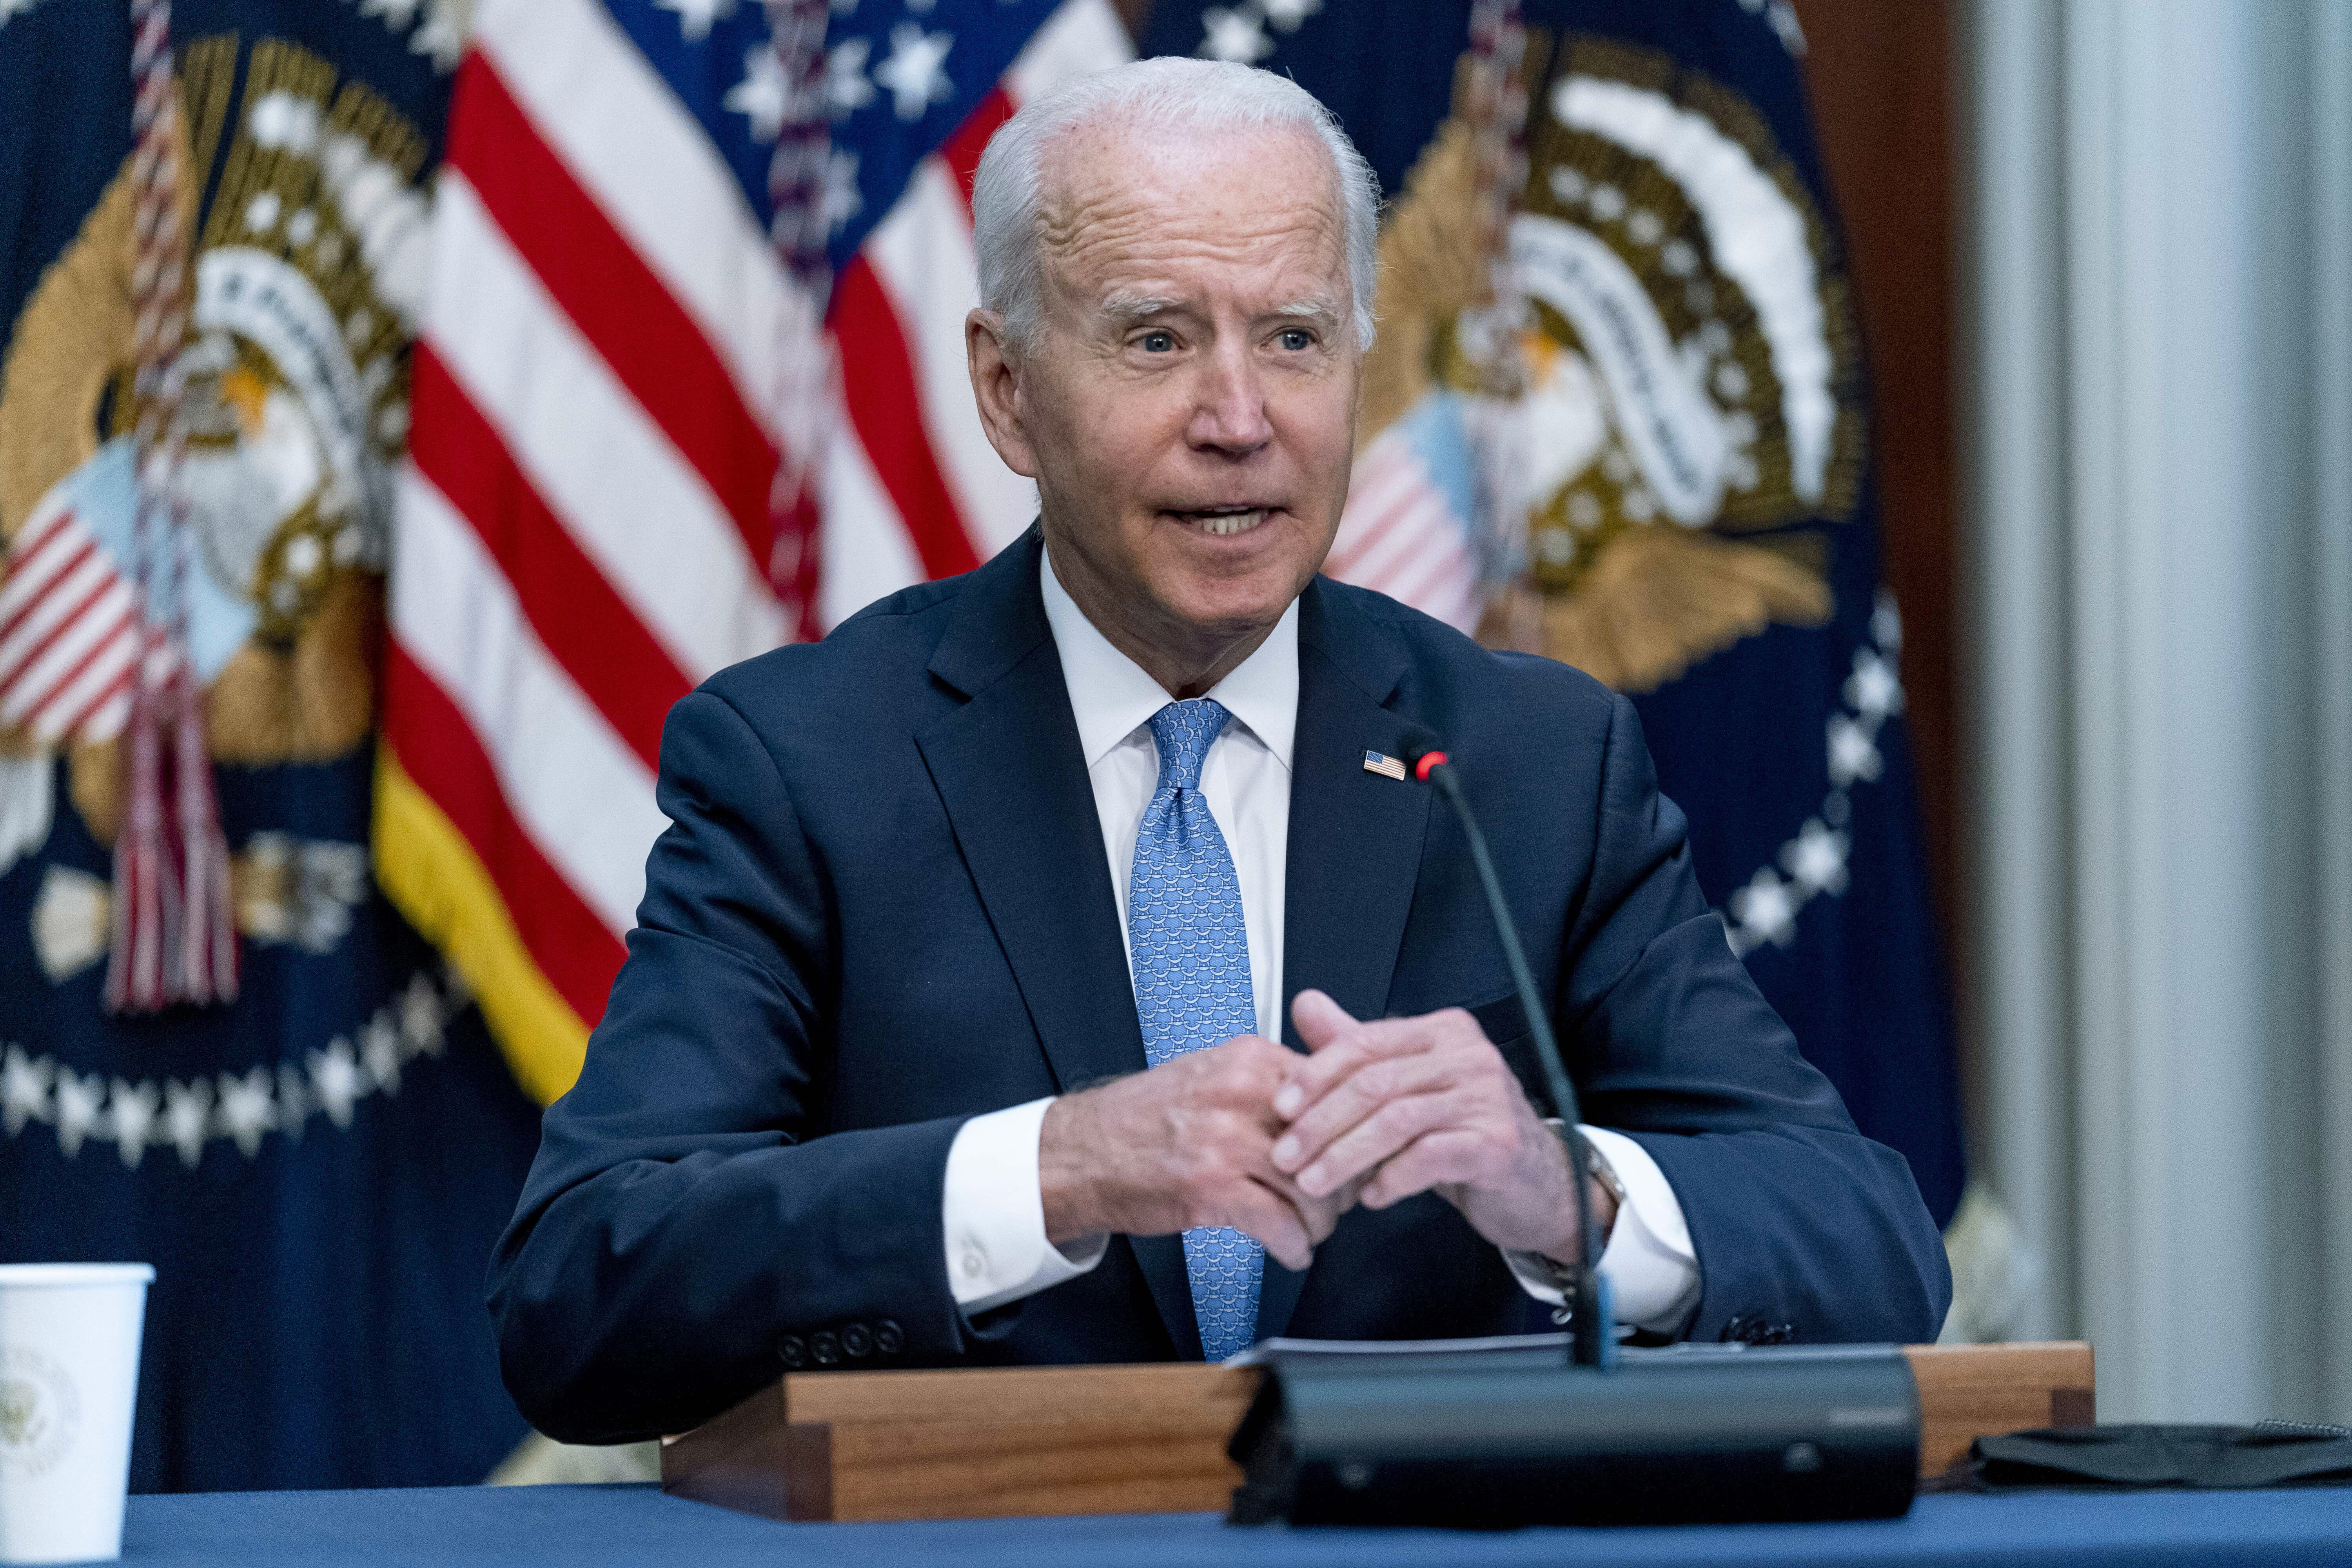 Biden touts employer vaccine mandates at meeting with top execs from Microsoft, Walgreens and others